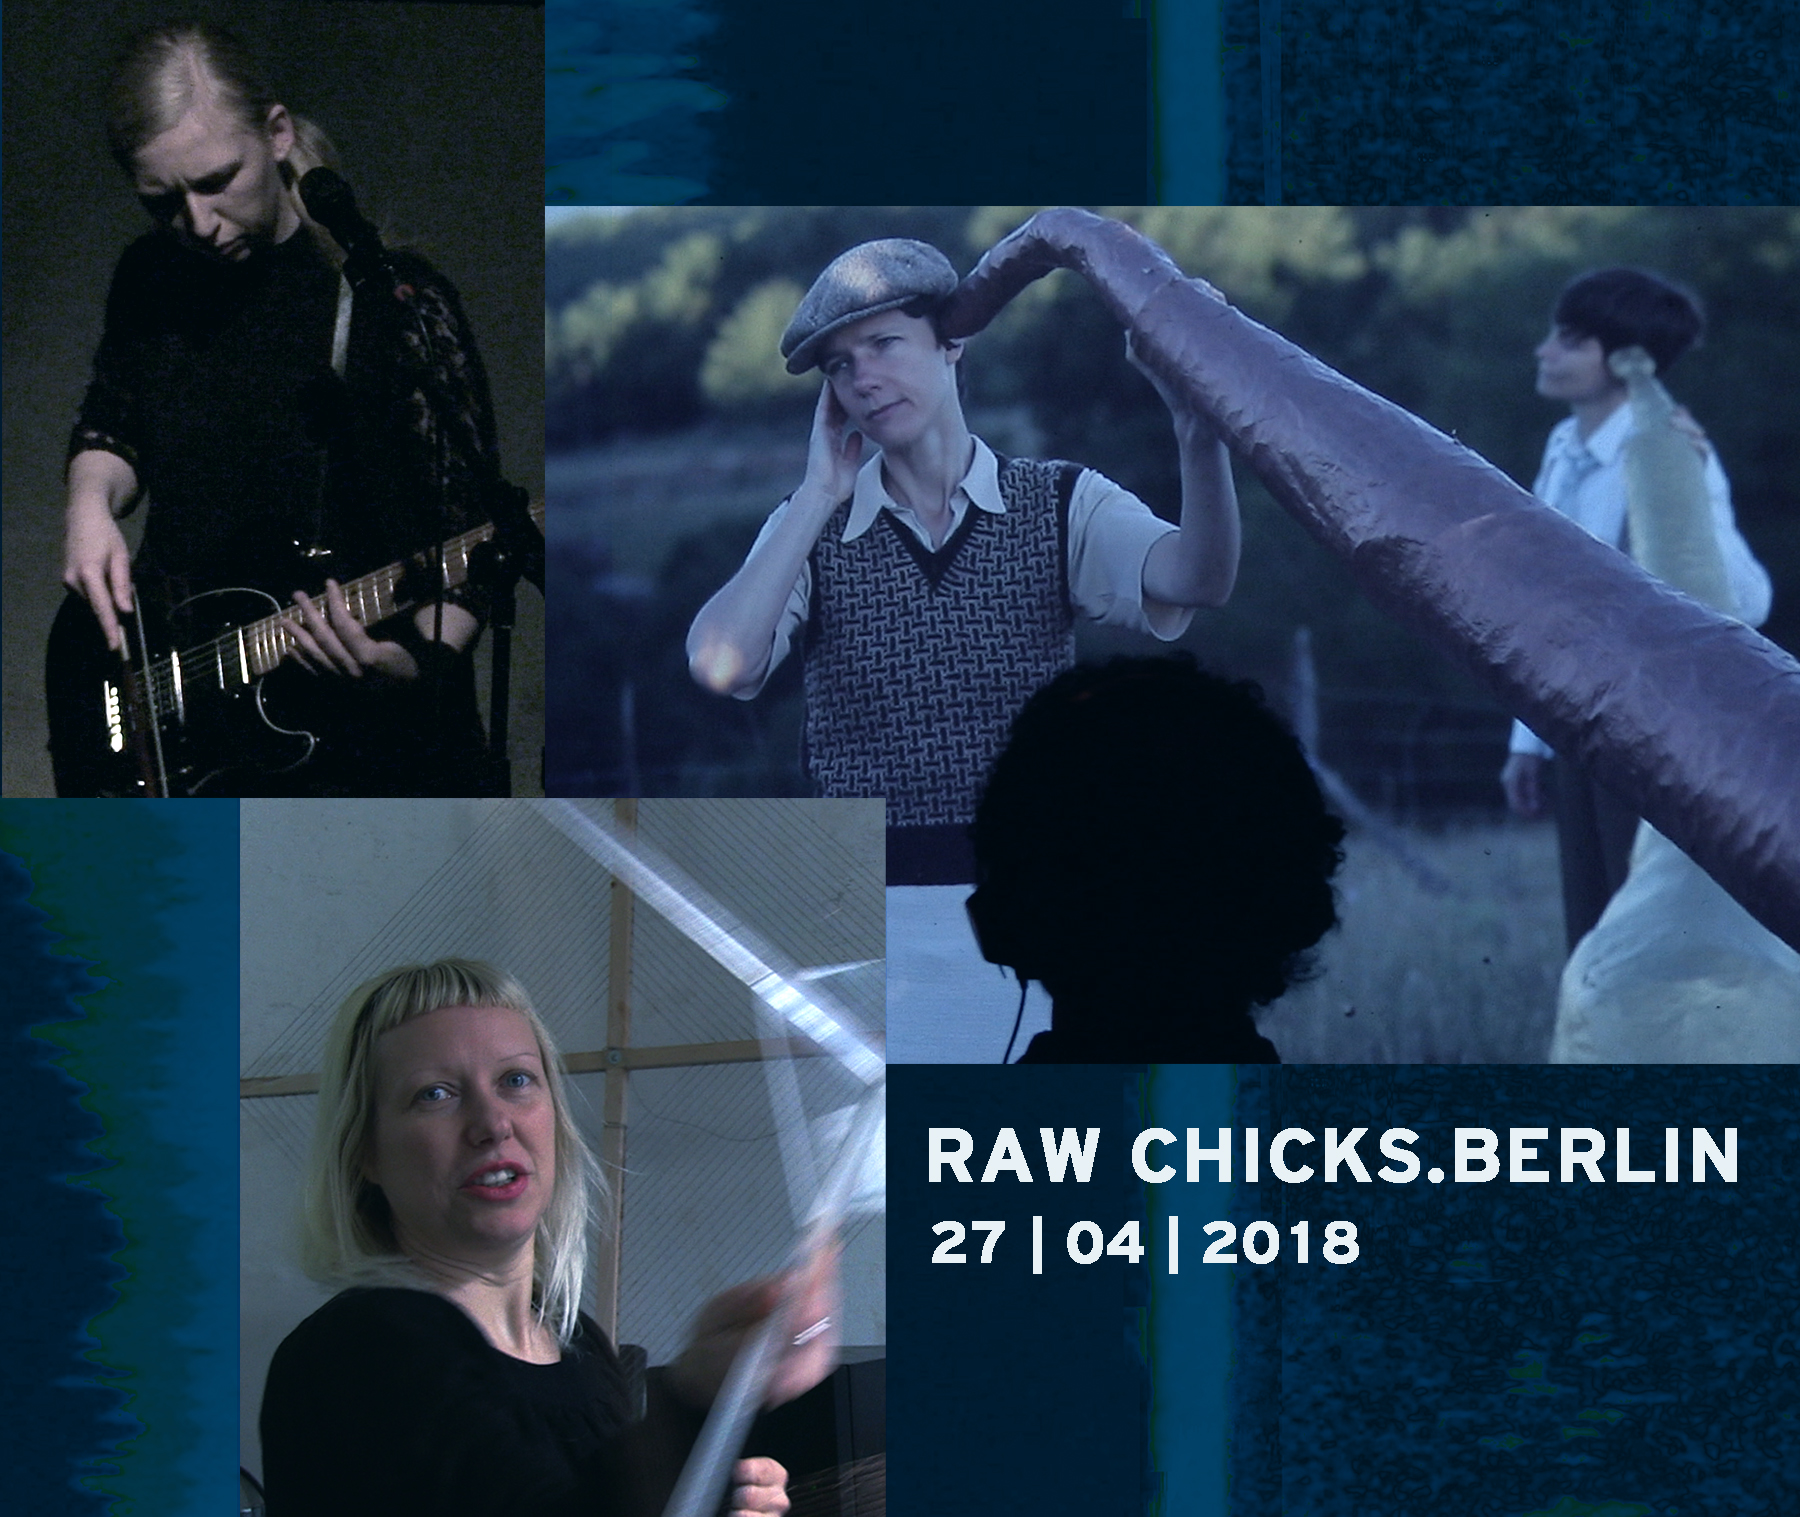 Image for RAW CHICKS.BERLIN - online release event + concert